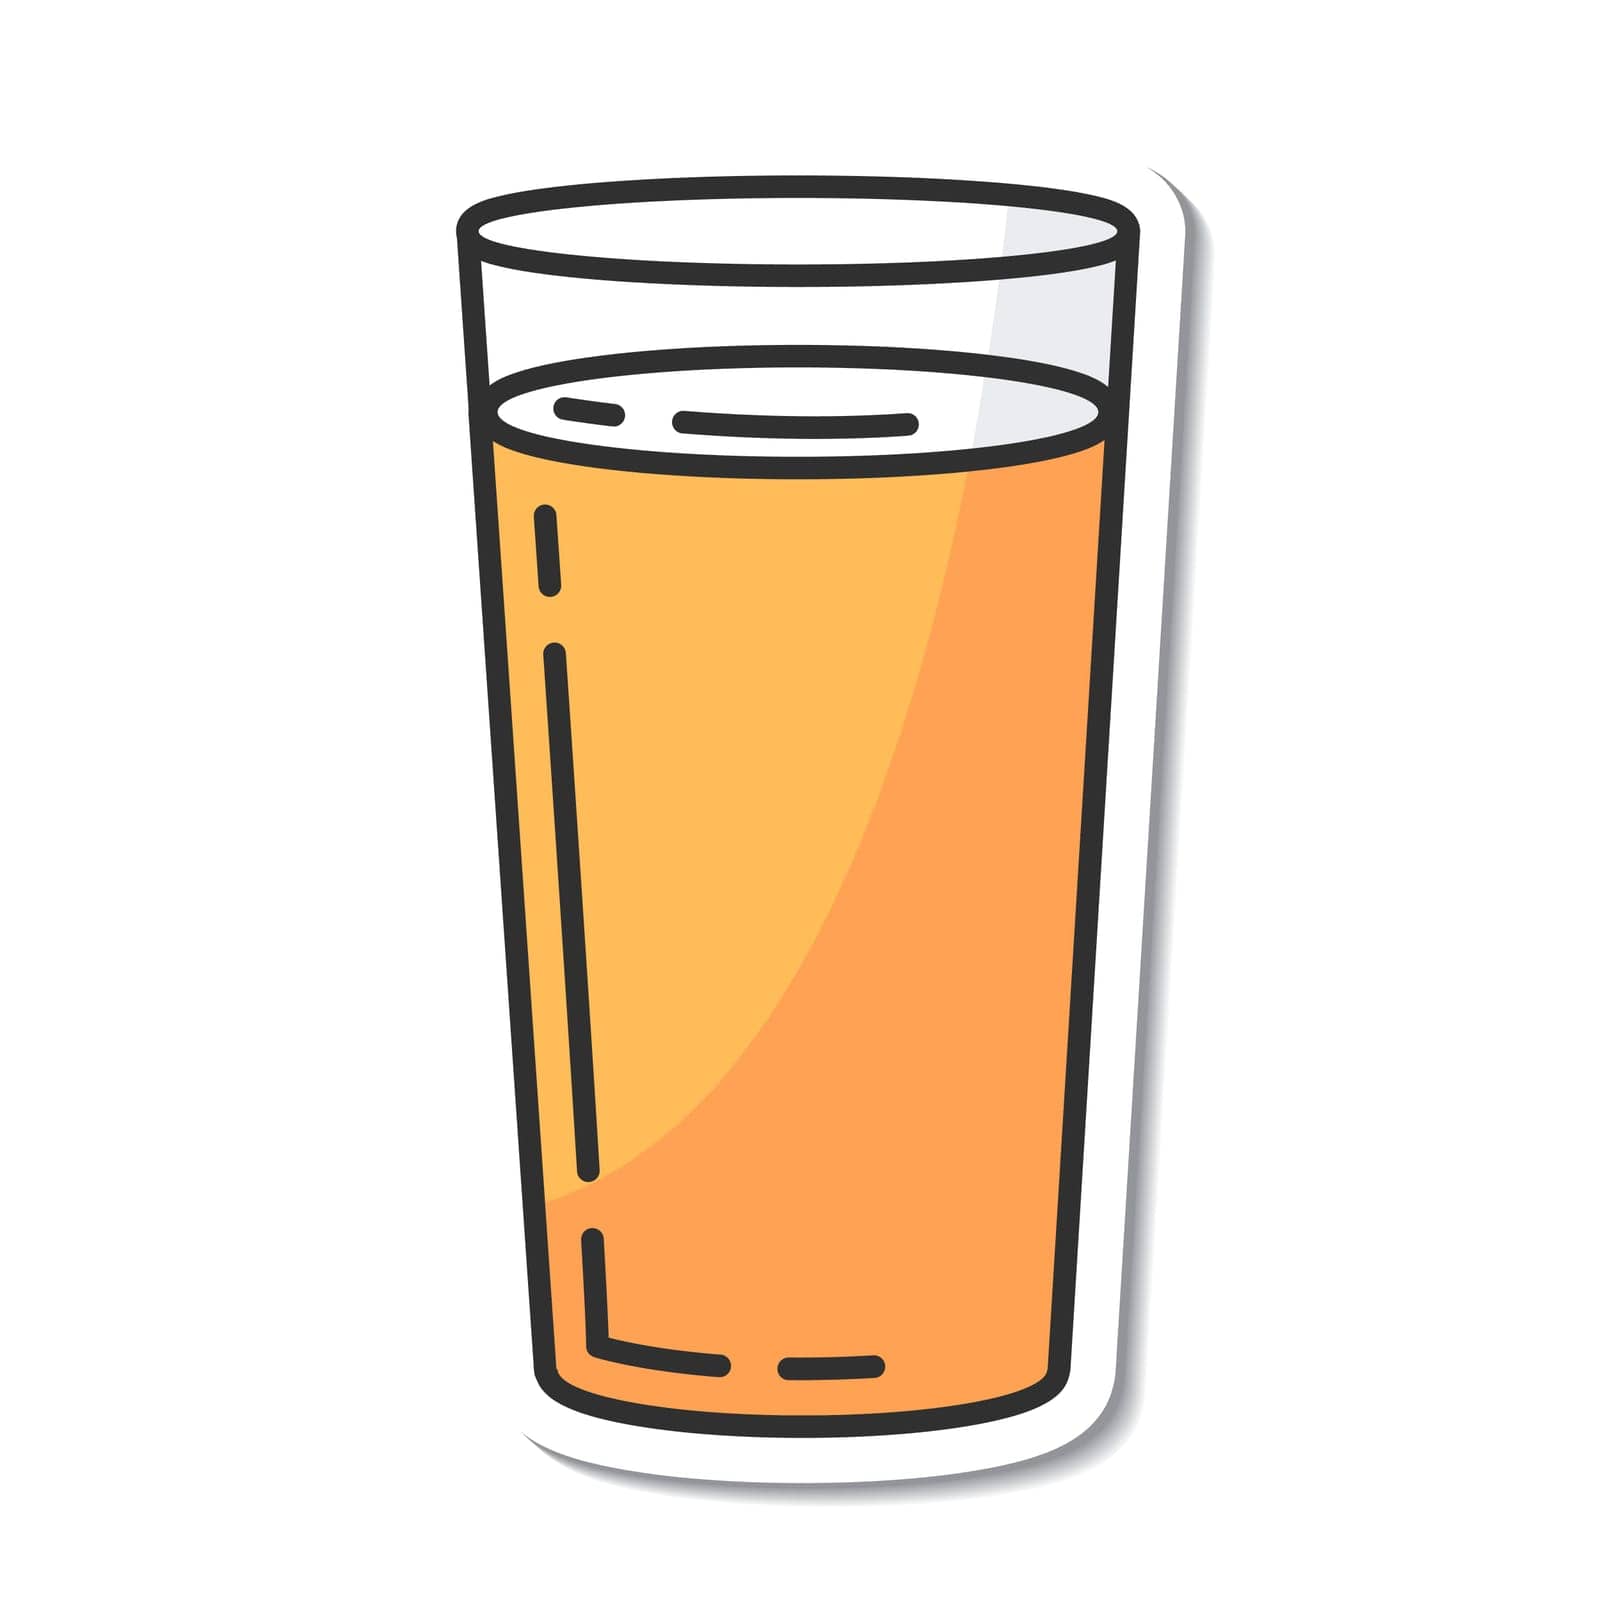 Sticker glass of beer isolated vector illustration, minimal design. Lager beer icon on a white background. Vector illustration